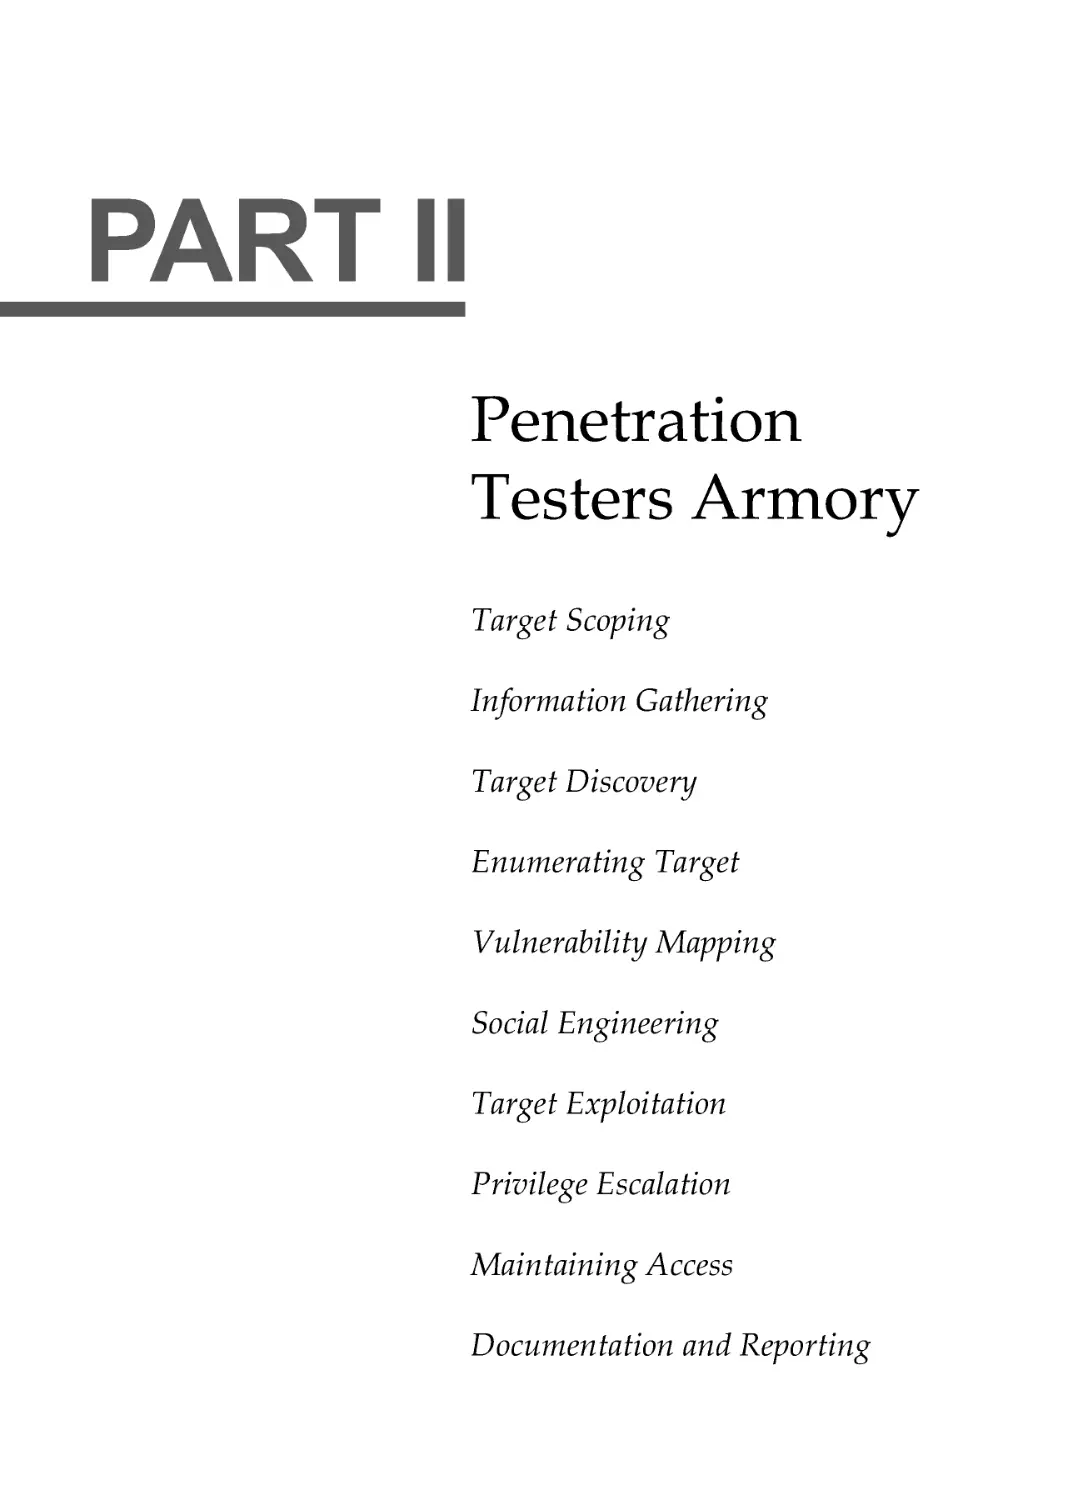 Part II: Penetration Testers Armory